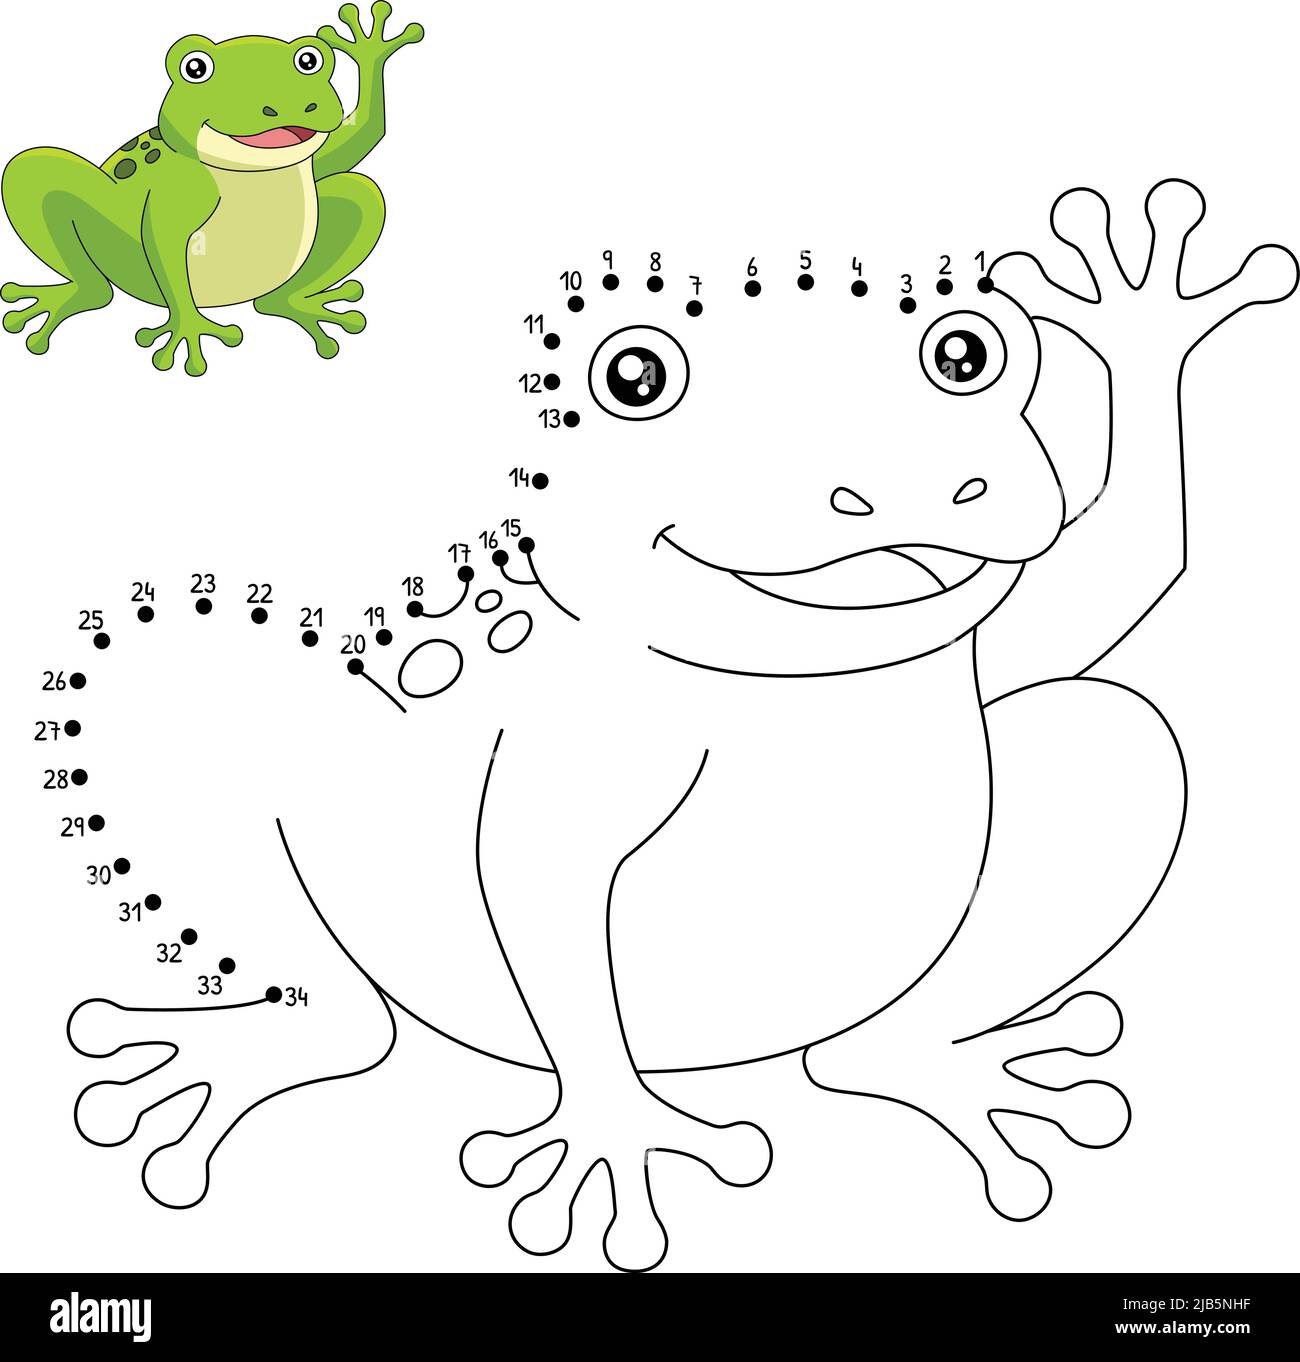 Dot to Dot Frog Coloring Page for Kids Stock Vector